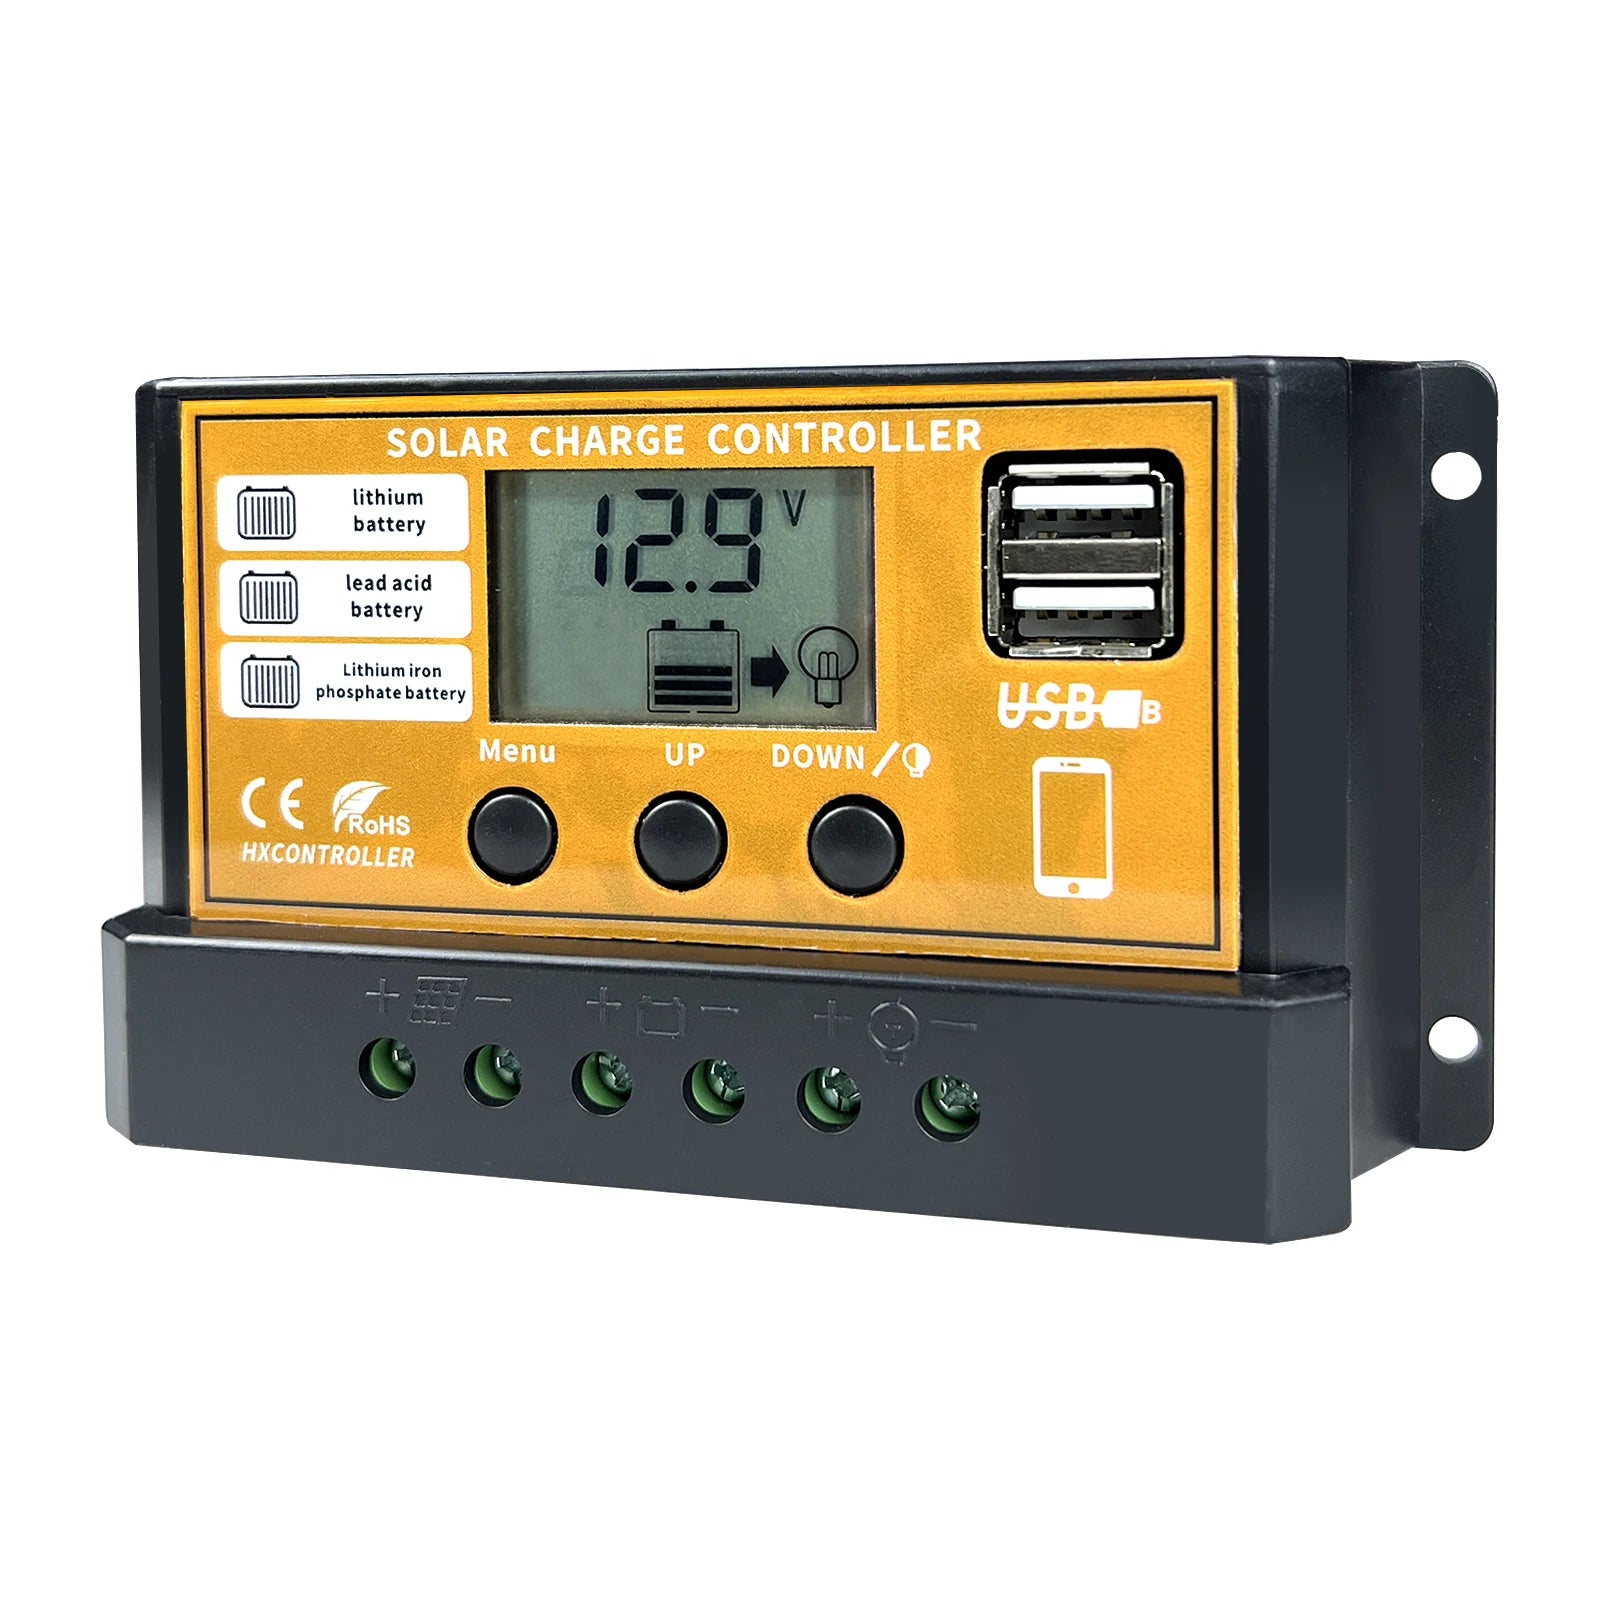 MPPT 720W 480W 360W 240W Solar Charge Controller, Multi-battery charger controller with USB port, menu options, and overcharge protection, compliant with EU RoHS standards.